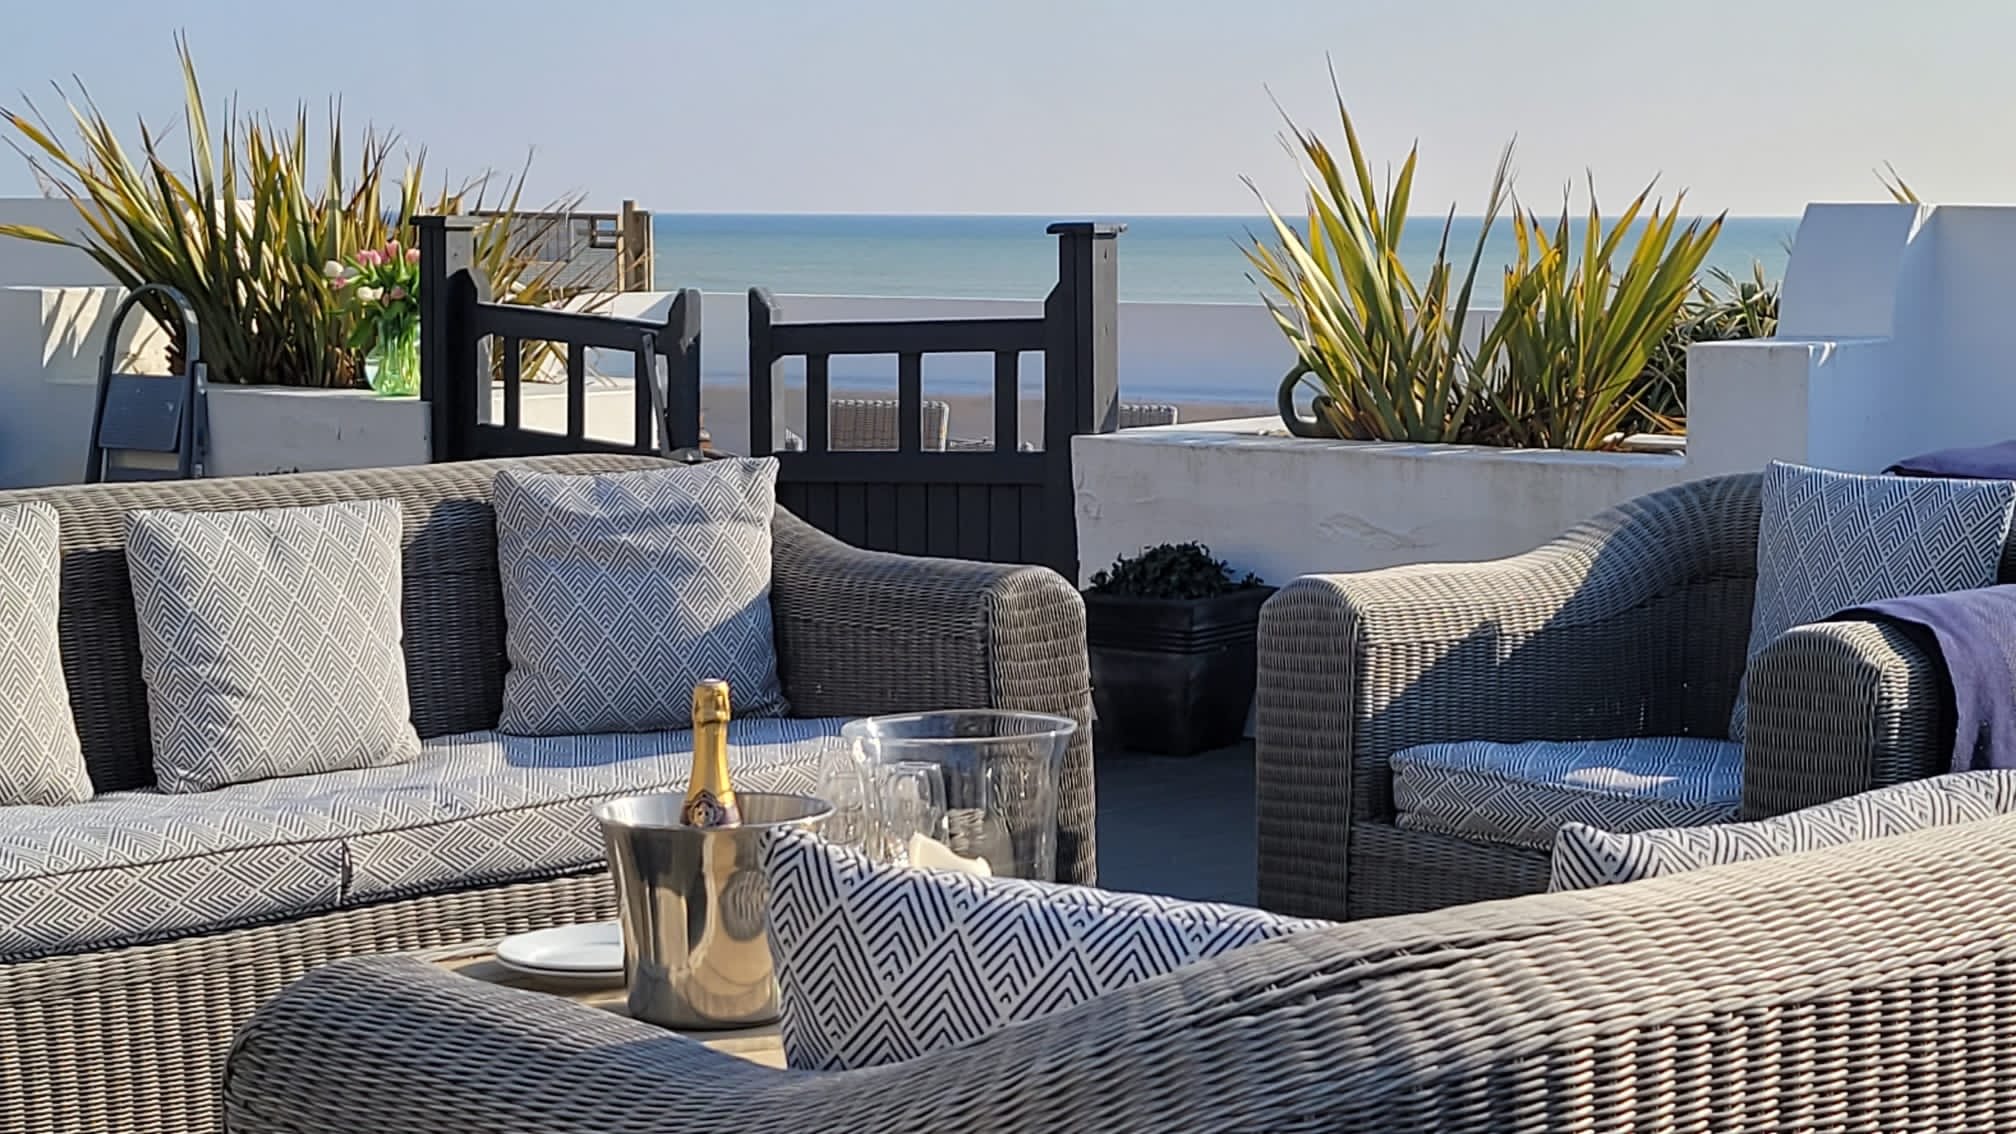 New England Luxury Beach House West Sussex outdoor seating 2.jpg